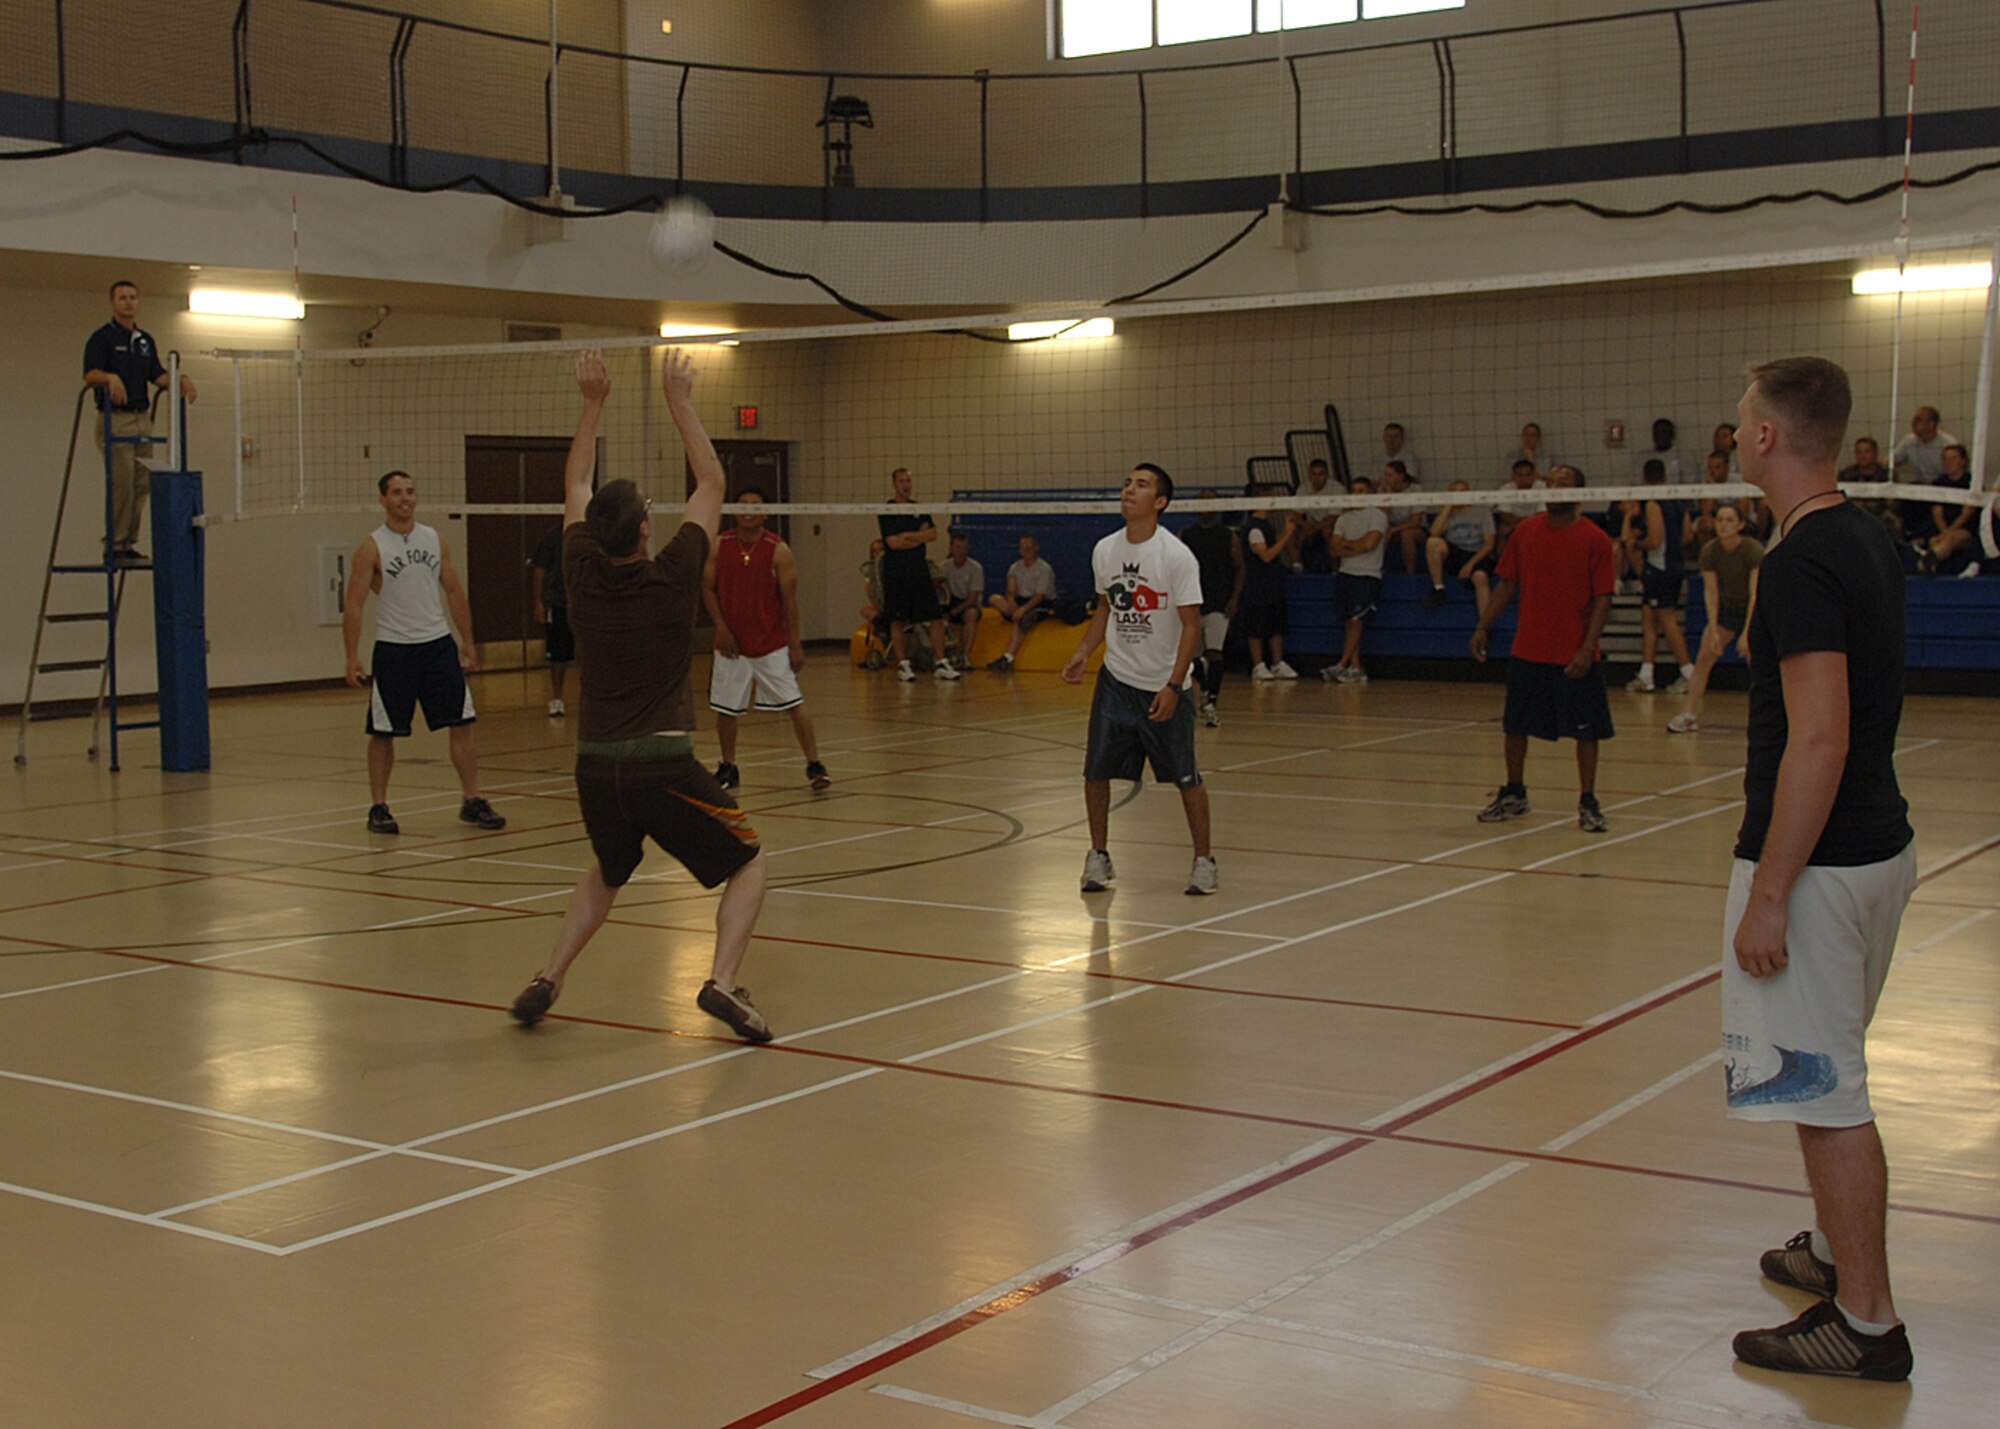 49th Civil Engineers Squadron's A and B volleyball teams compete against each other during Sports Day, October 10, at the Fitness and Sports Center at Holloman Air Force Base, N.M. The Fitness and Sports Center held 15 events and over 2000 Team Holloman members participated in the events. (U.S. Air Force photo/Airman 1st Class John D. Strong II) 